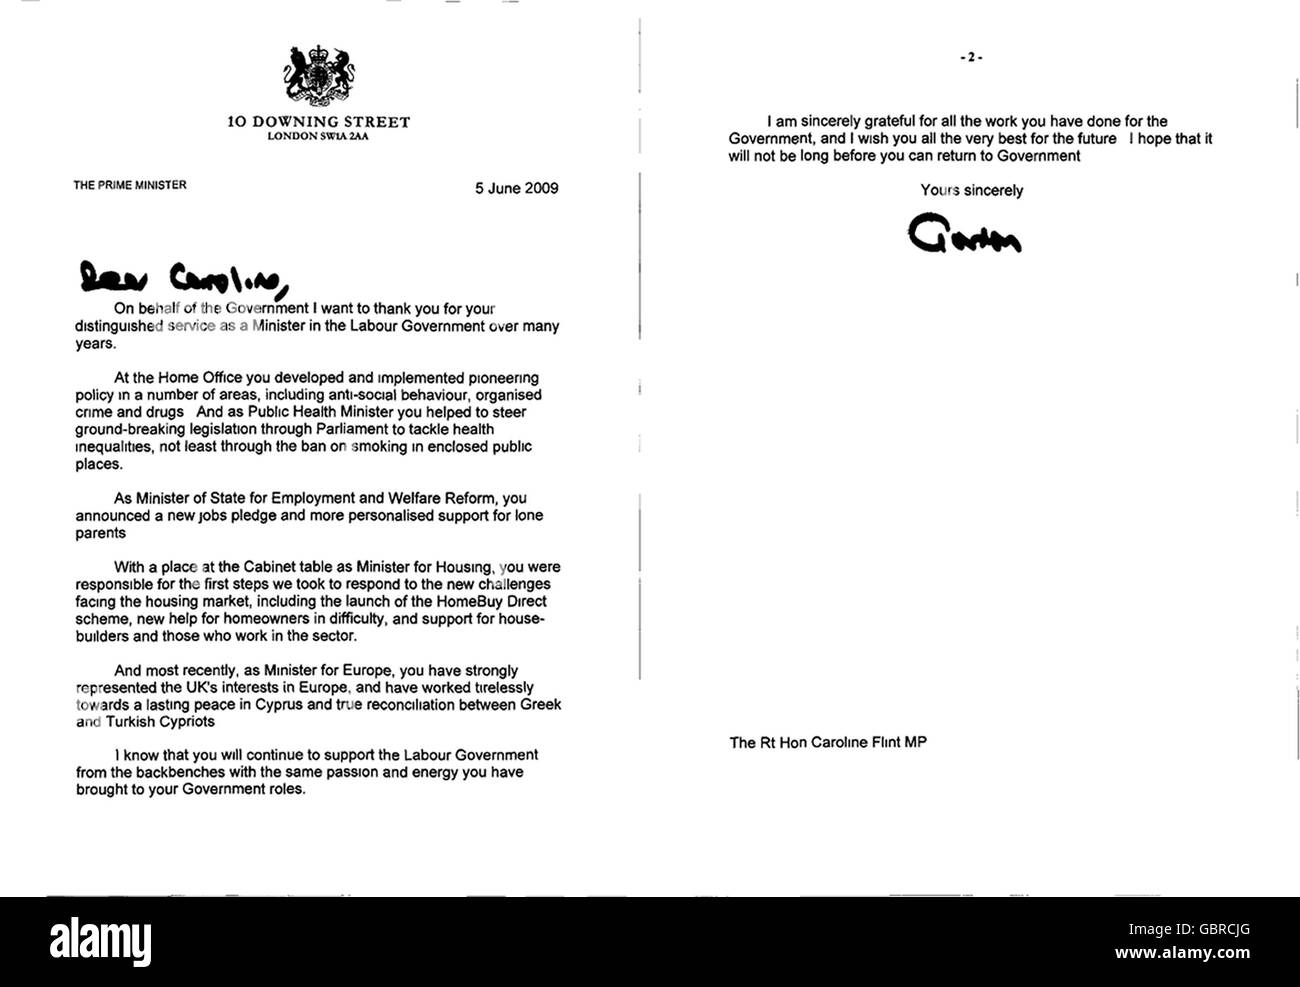 A copy of the letter sent from Prime Minister Gordon Brown to Caroline Flint, after she delivered a devastating attack on him, accusing him of using women ministers as 'female window dressing'. Stock Photo